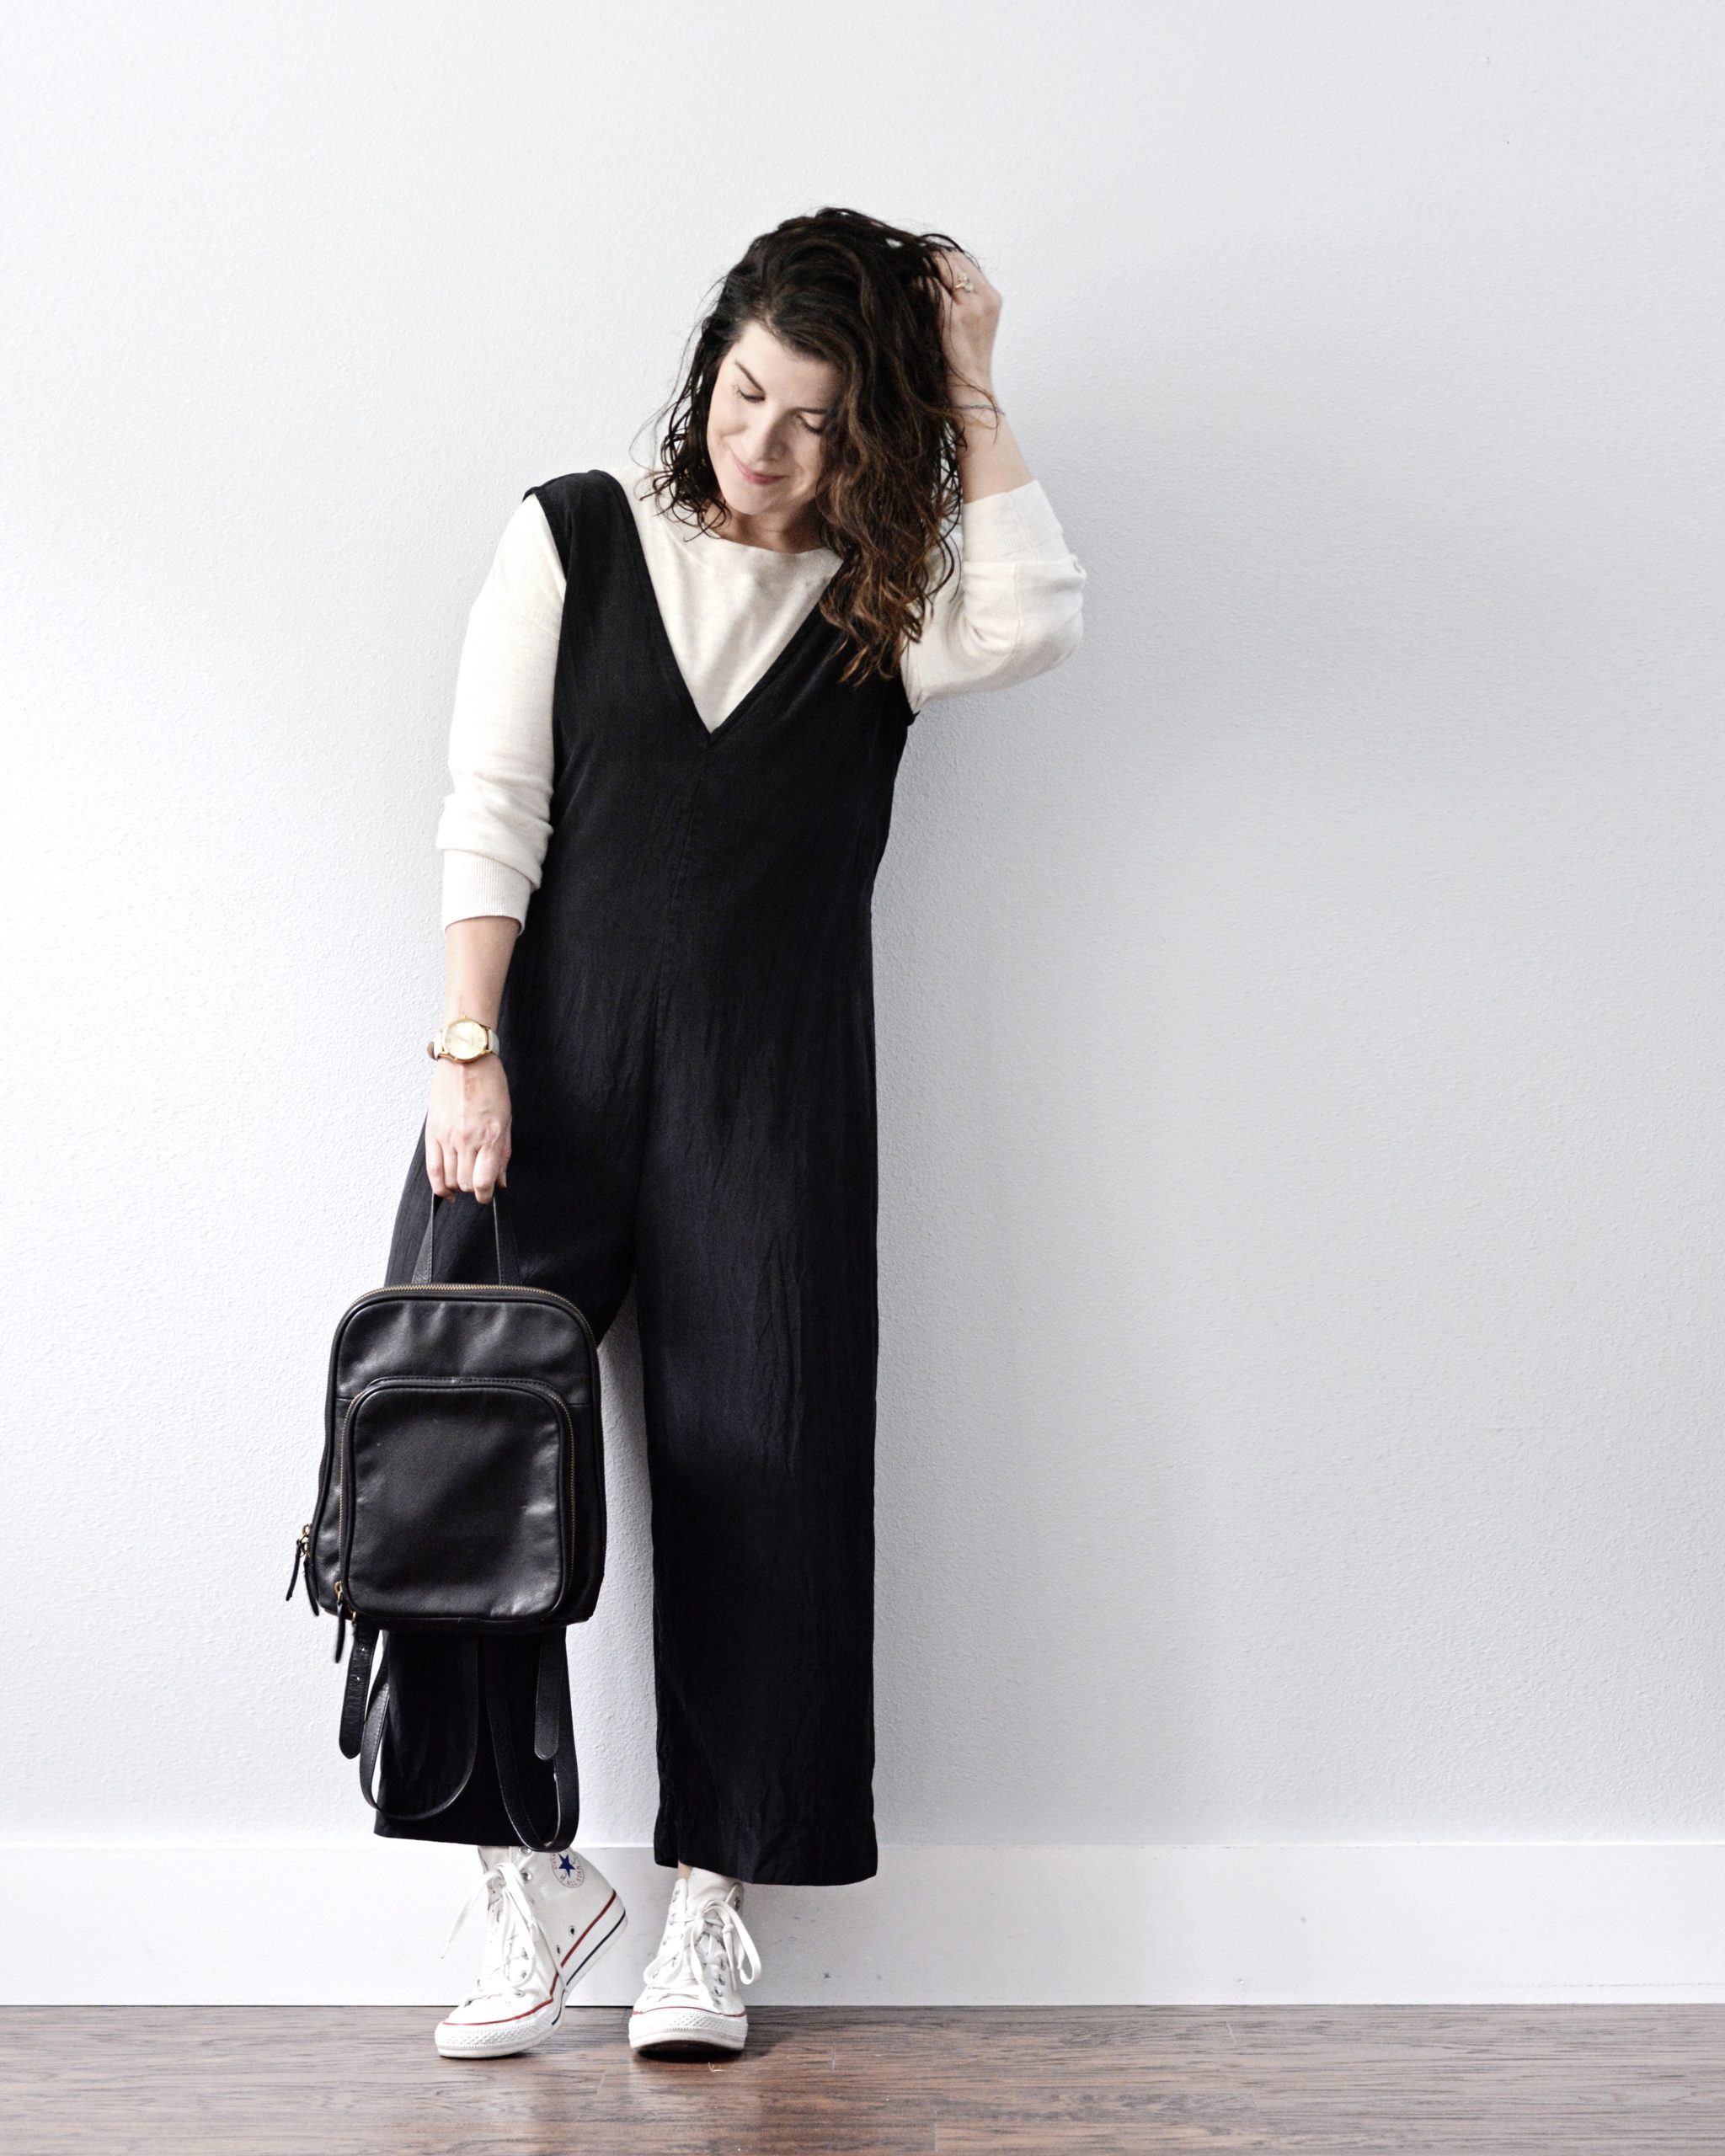 A white woman standing against a light grey wall is wearing a black v neck jumpsuit over an oatmeal colored sweater with white converse sneakers. She is holding a black leather backpack in her right hand and her left hand is in her hair. She is looking down.